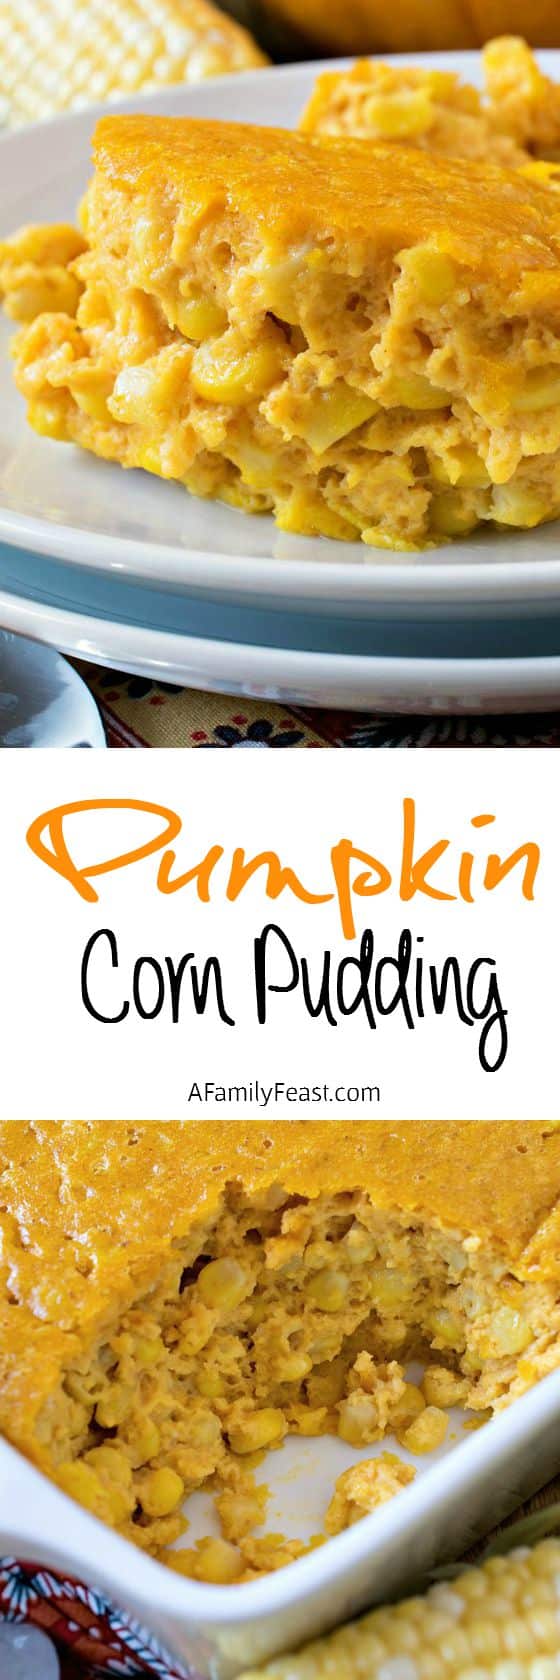 Pumpkin Corn Pudding - Your guests will want seconds! A delicious twist on a classic corn pudding - we add pumpkin to the custard and the results are fantastic!